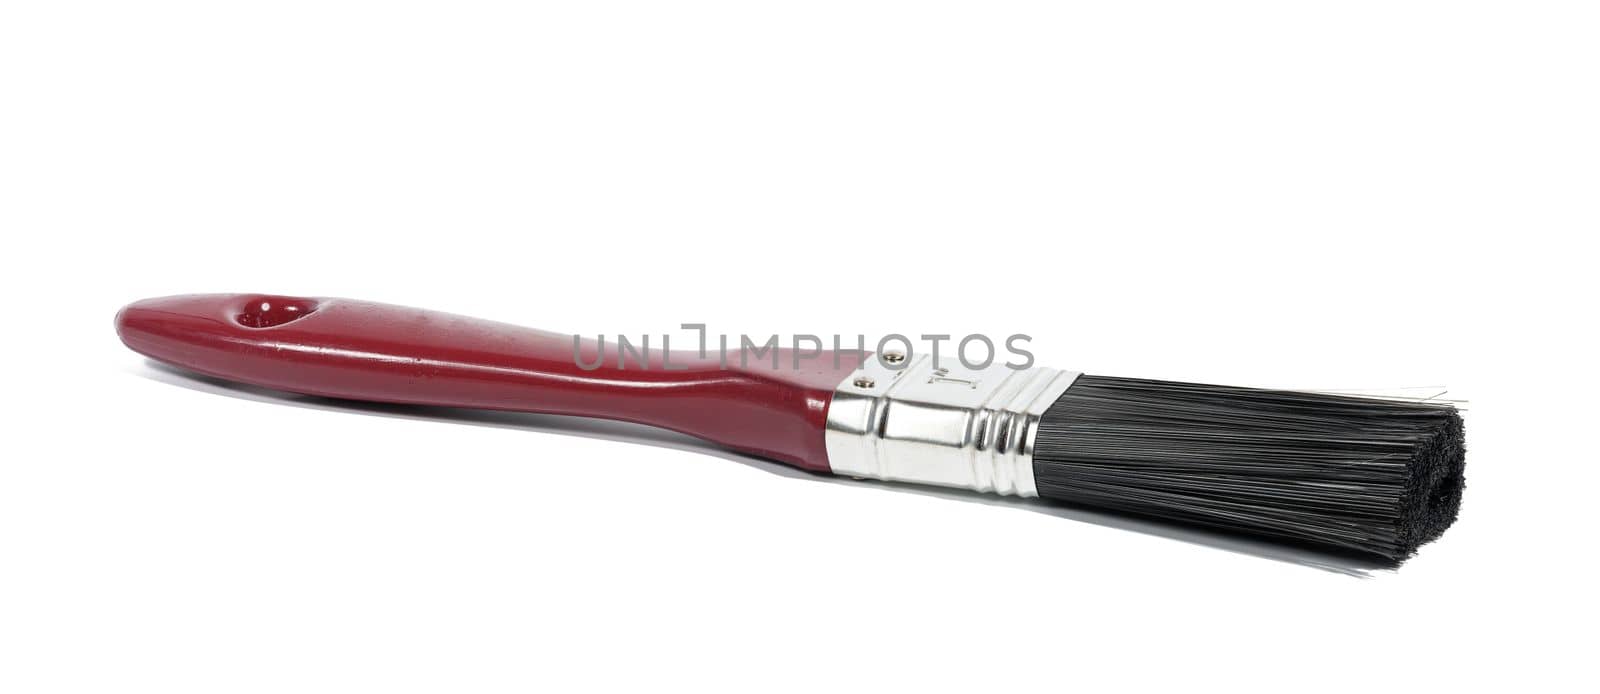 New paint brush with wooden brown handle isolated on white background, top view by ndanko